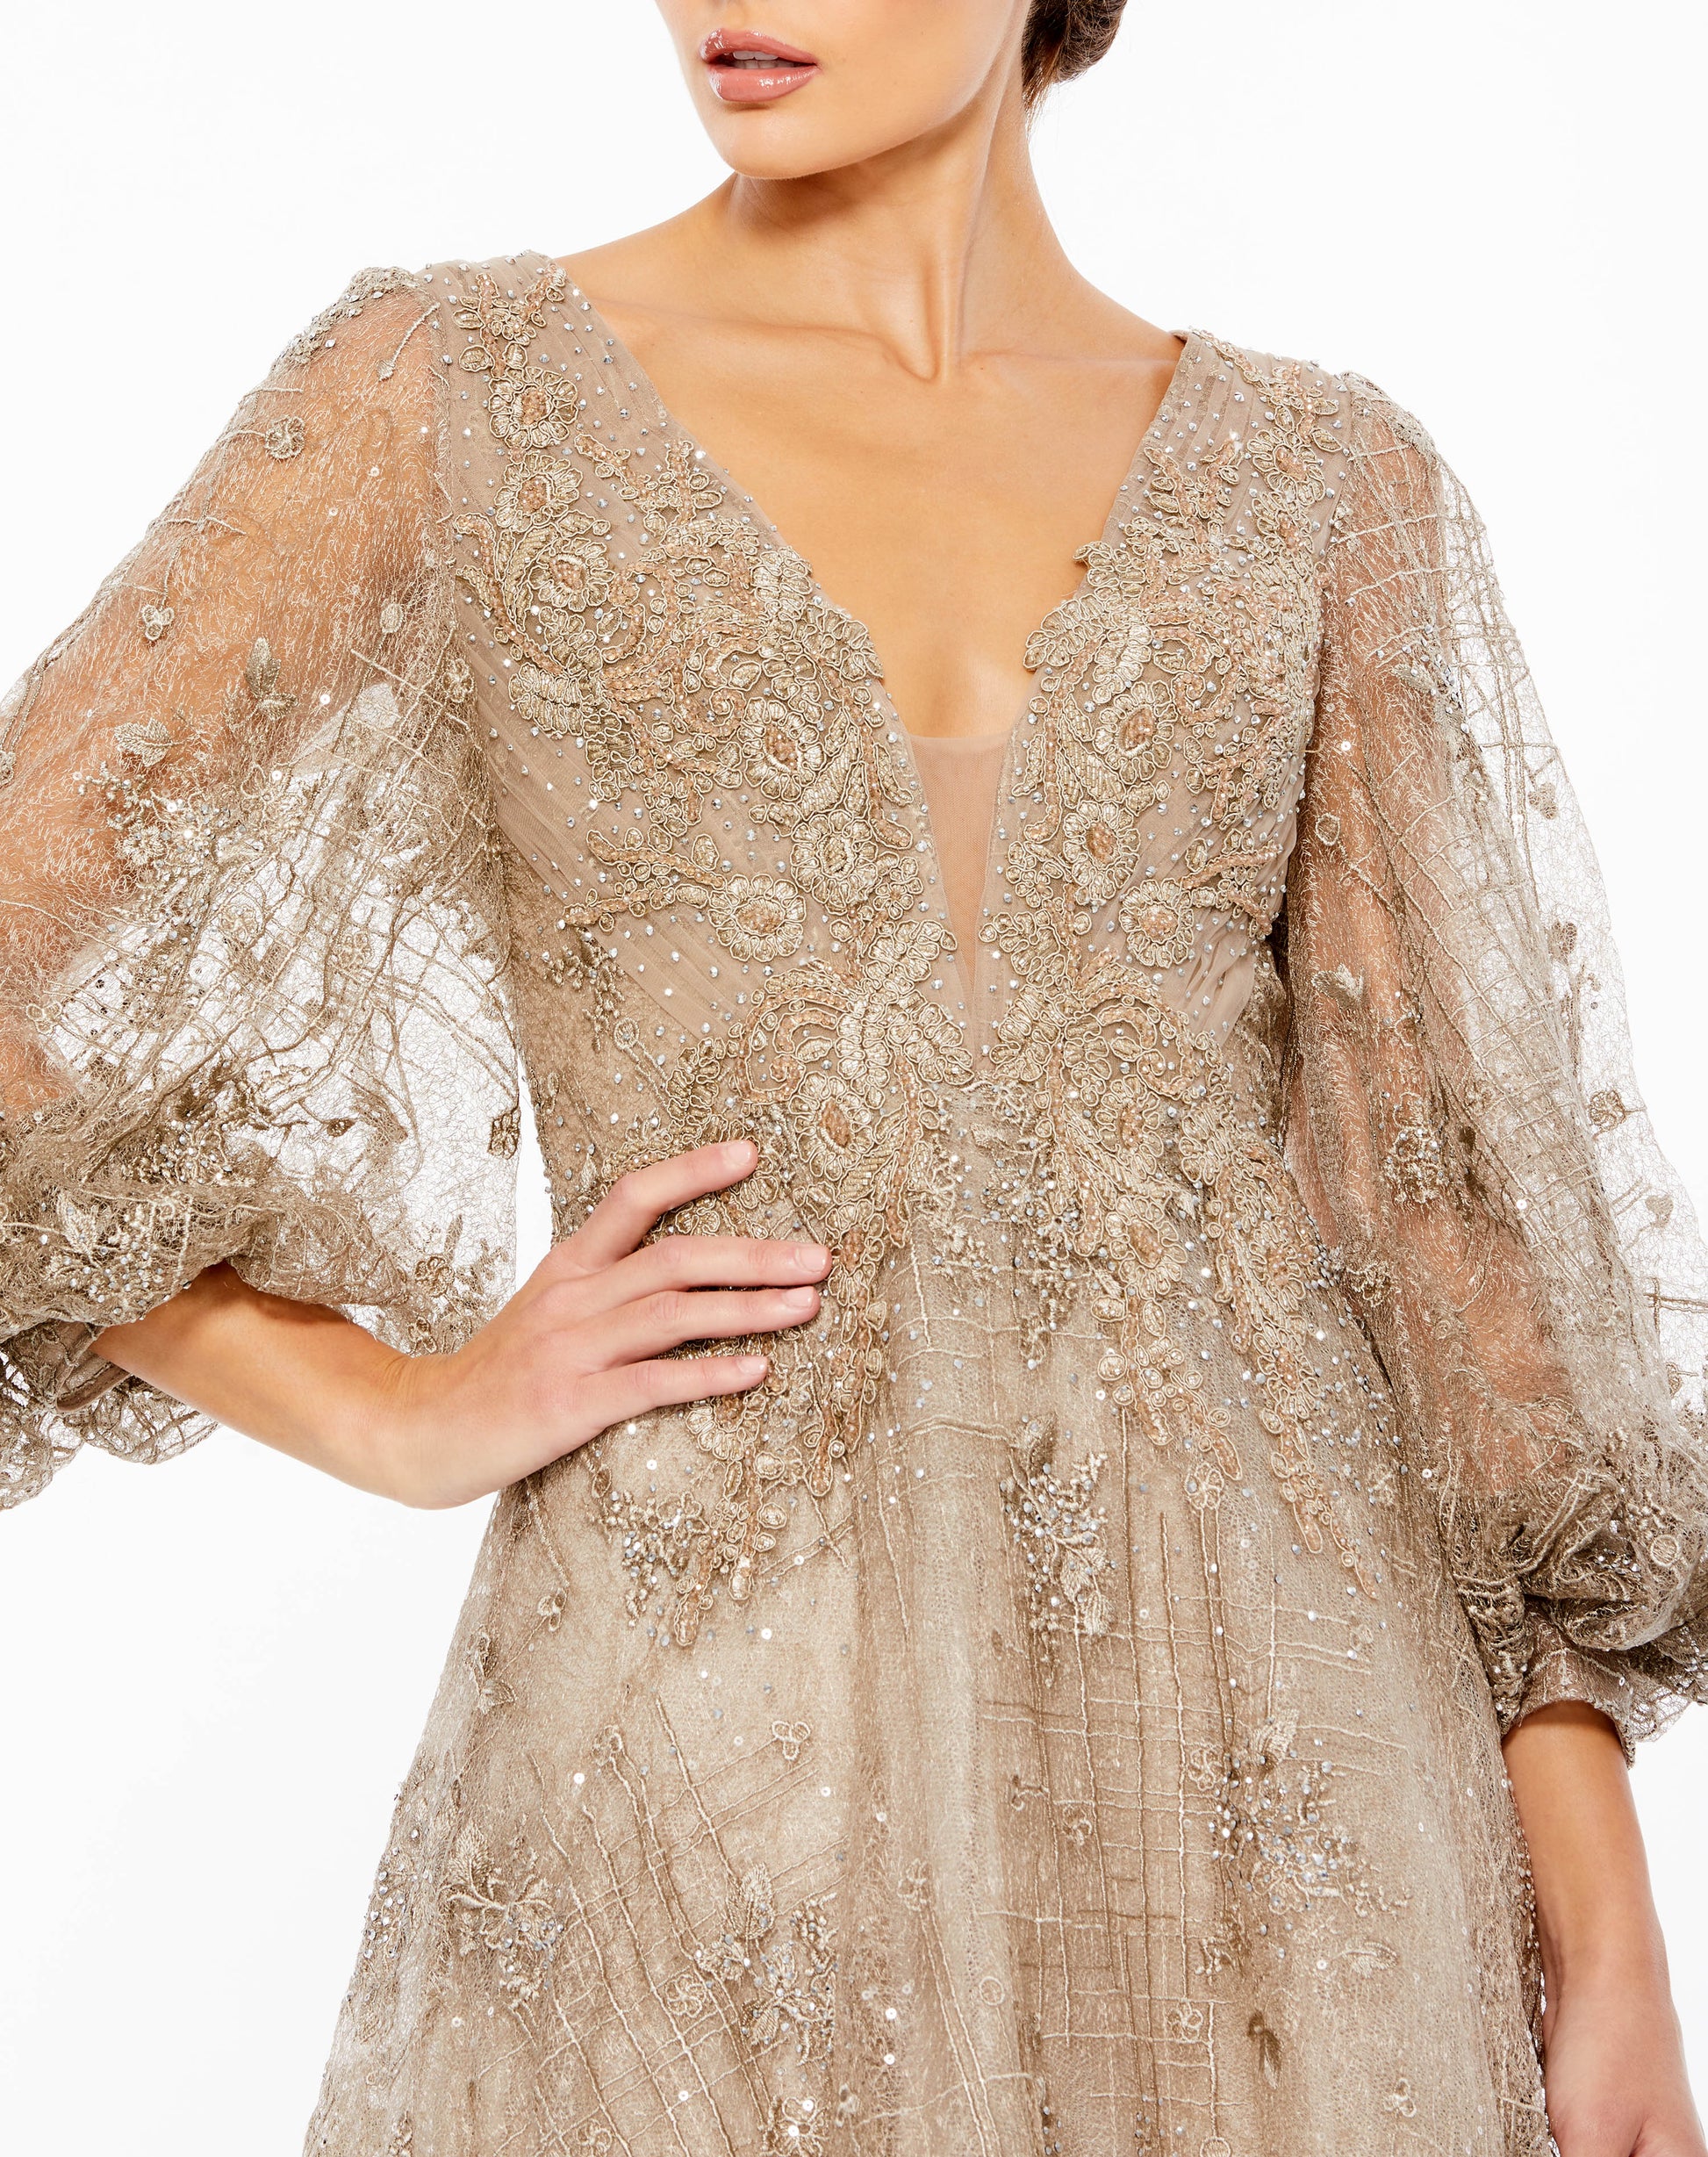 Mac Duggal Sheer sequin-embellished embroidered overlay; 100% polyester lining Partially lined bodice; fully lined through skirt; sheer unlined puff sleeves Plunging v-neckline Long puff sleeves All-over silver hand-sequined accents Mesh bust insert Sweep